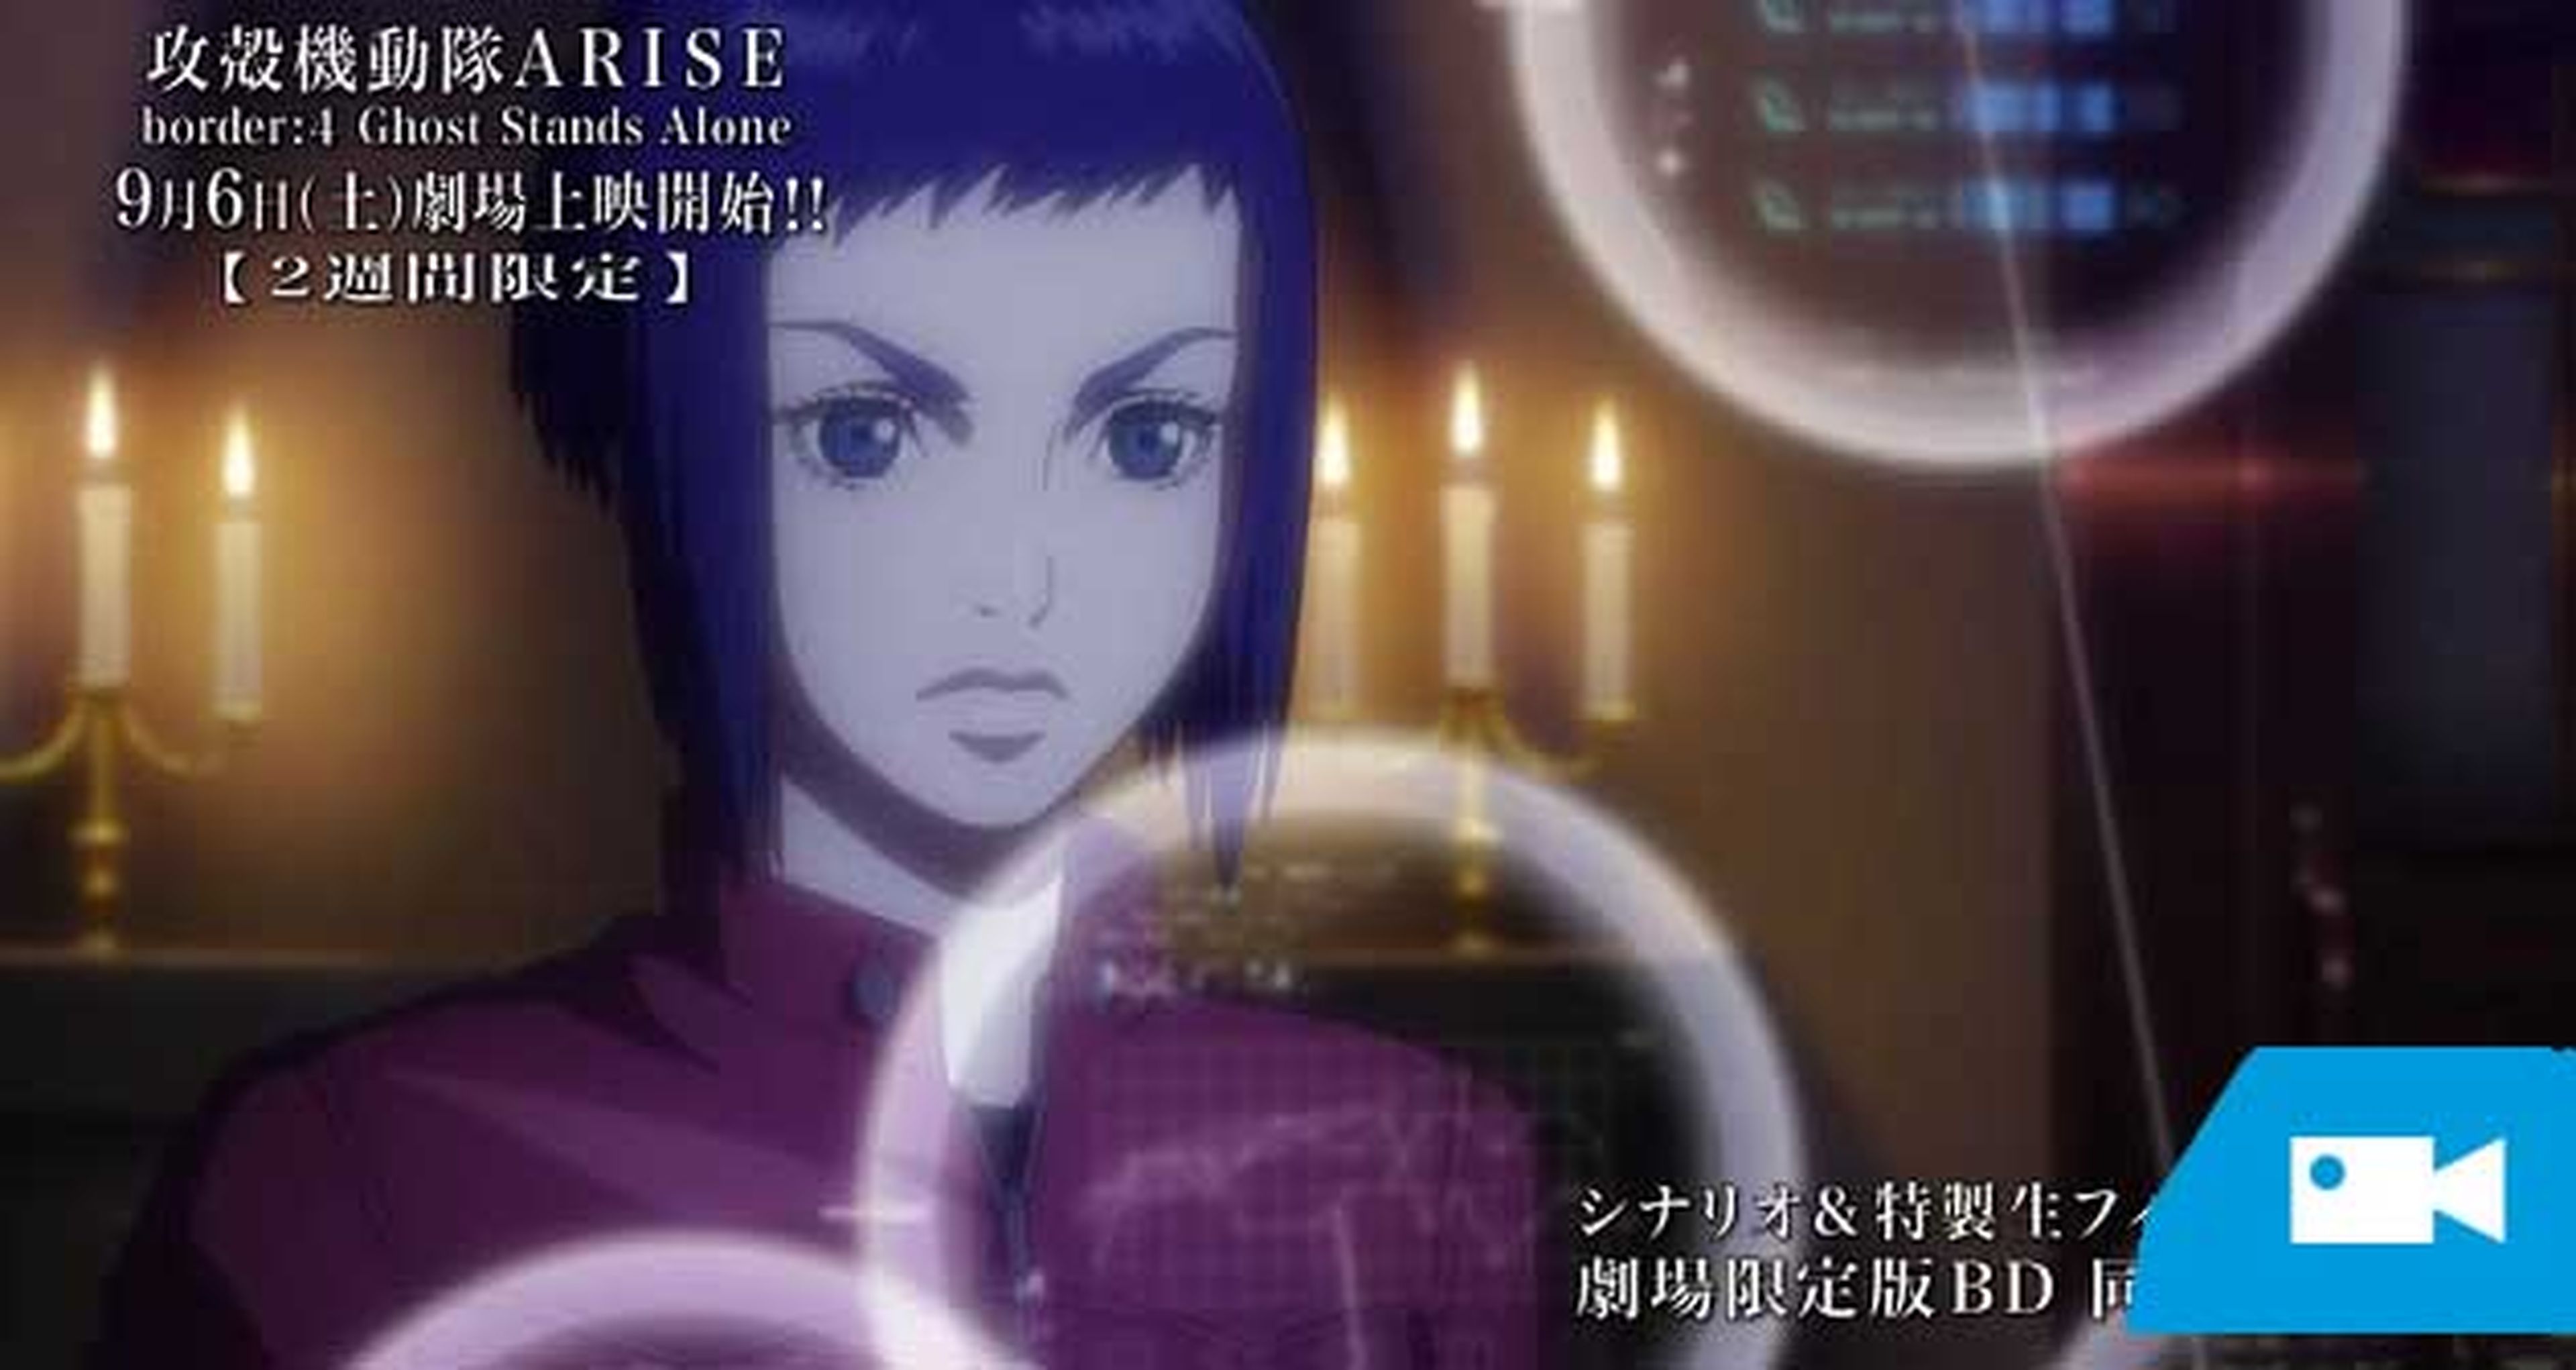 Nueve minutos de Ghost in the Shell Arise border: 4